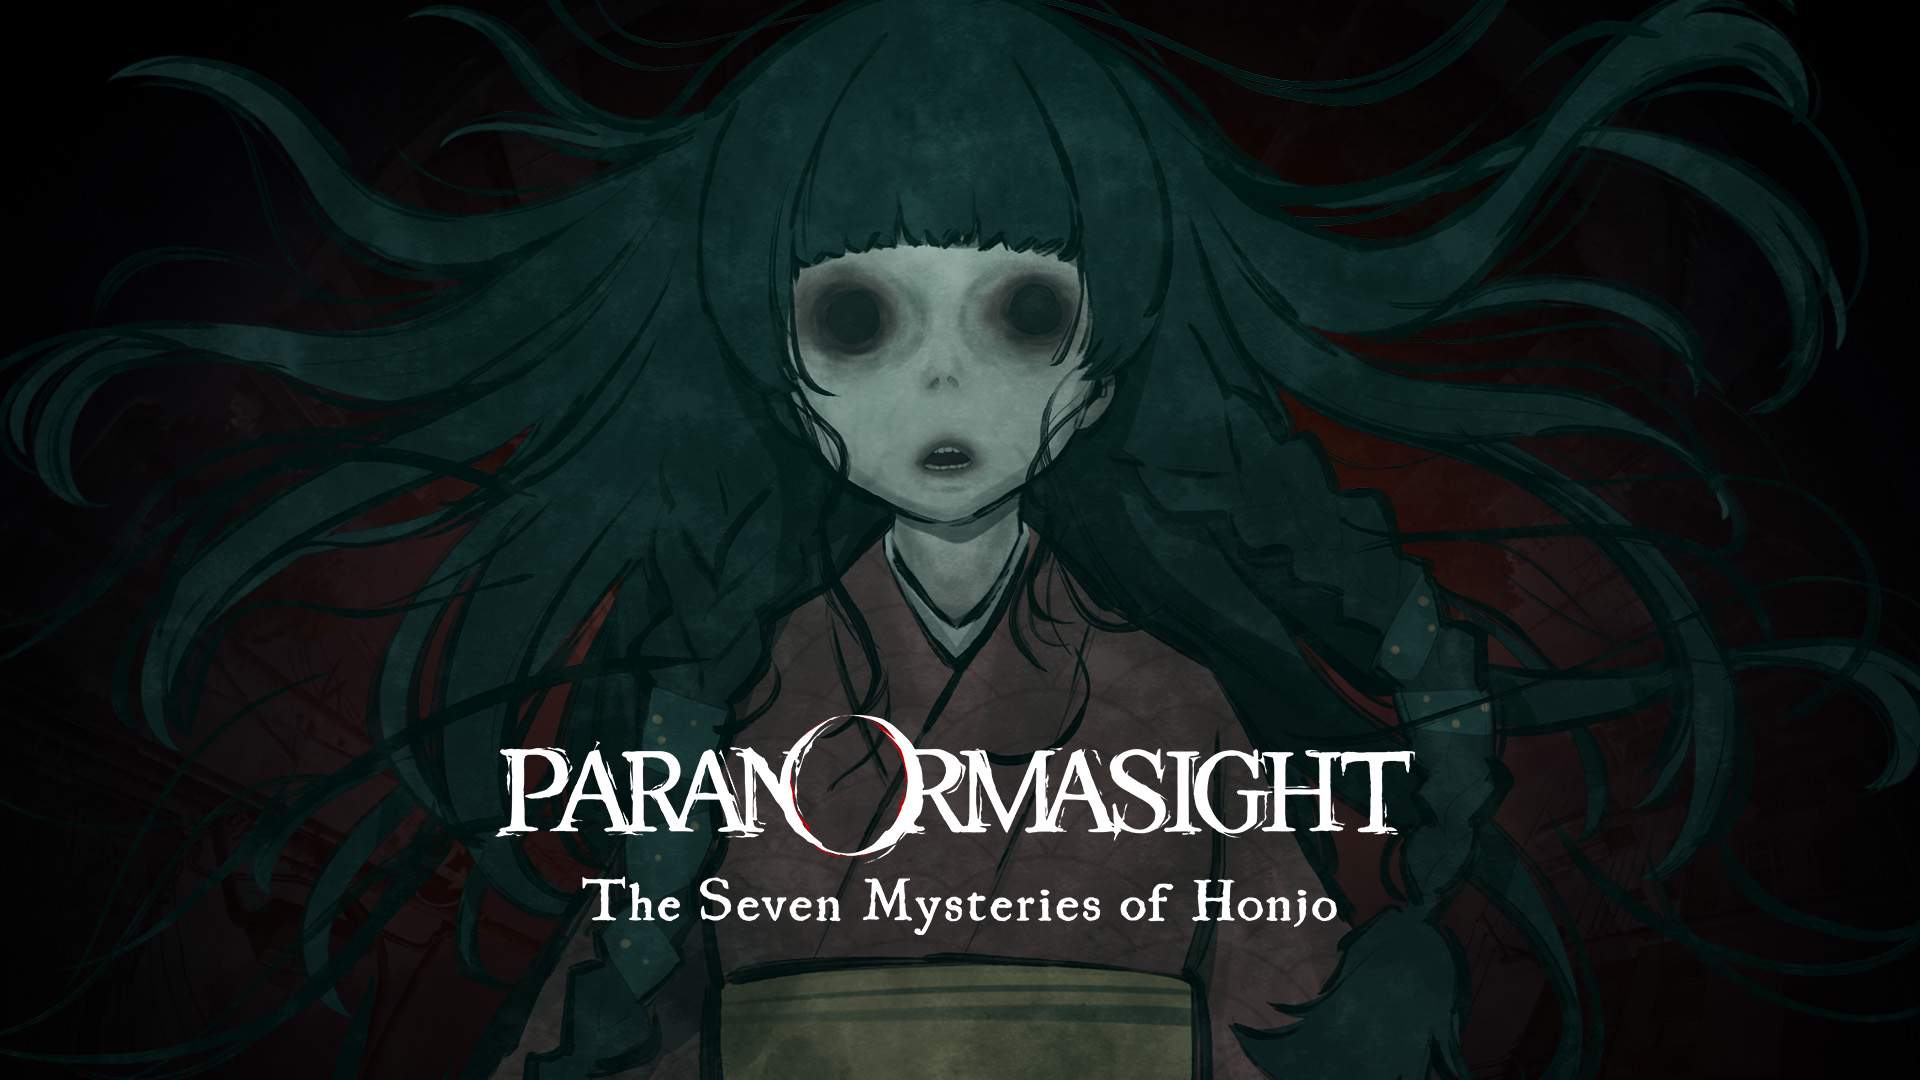 An unsettling, young ghost girl with the PARANORMASIGHT logo. She is pale and haunting.